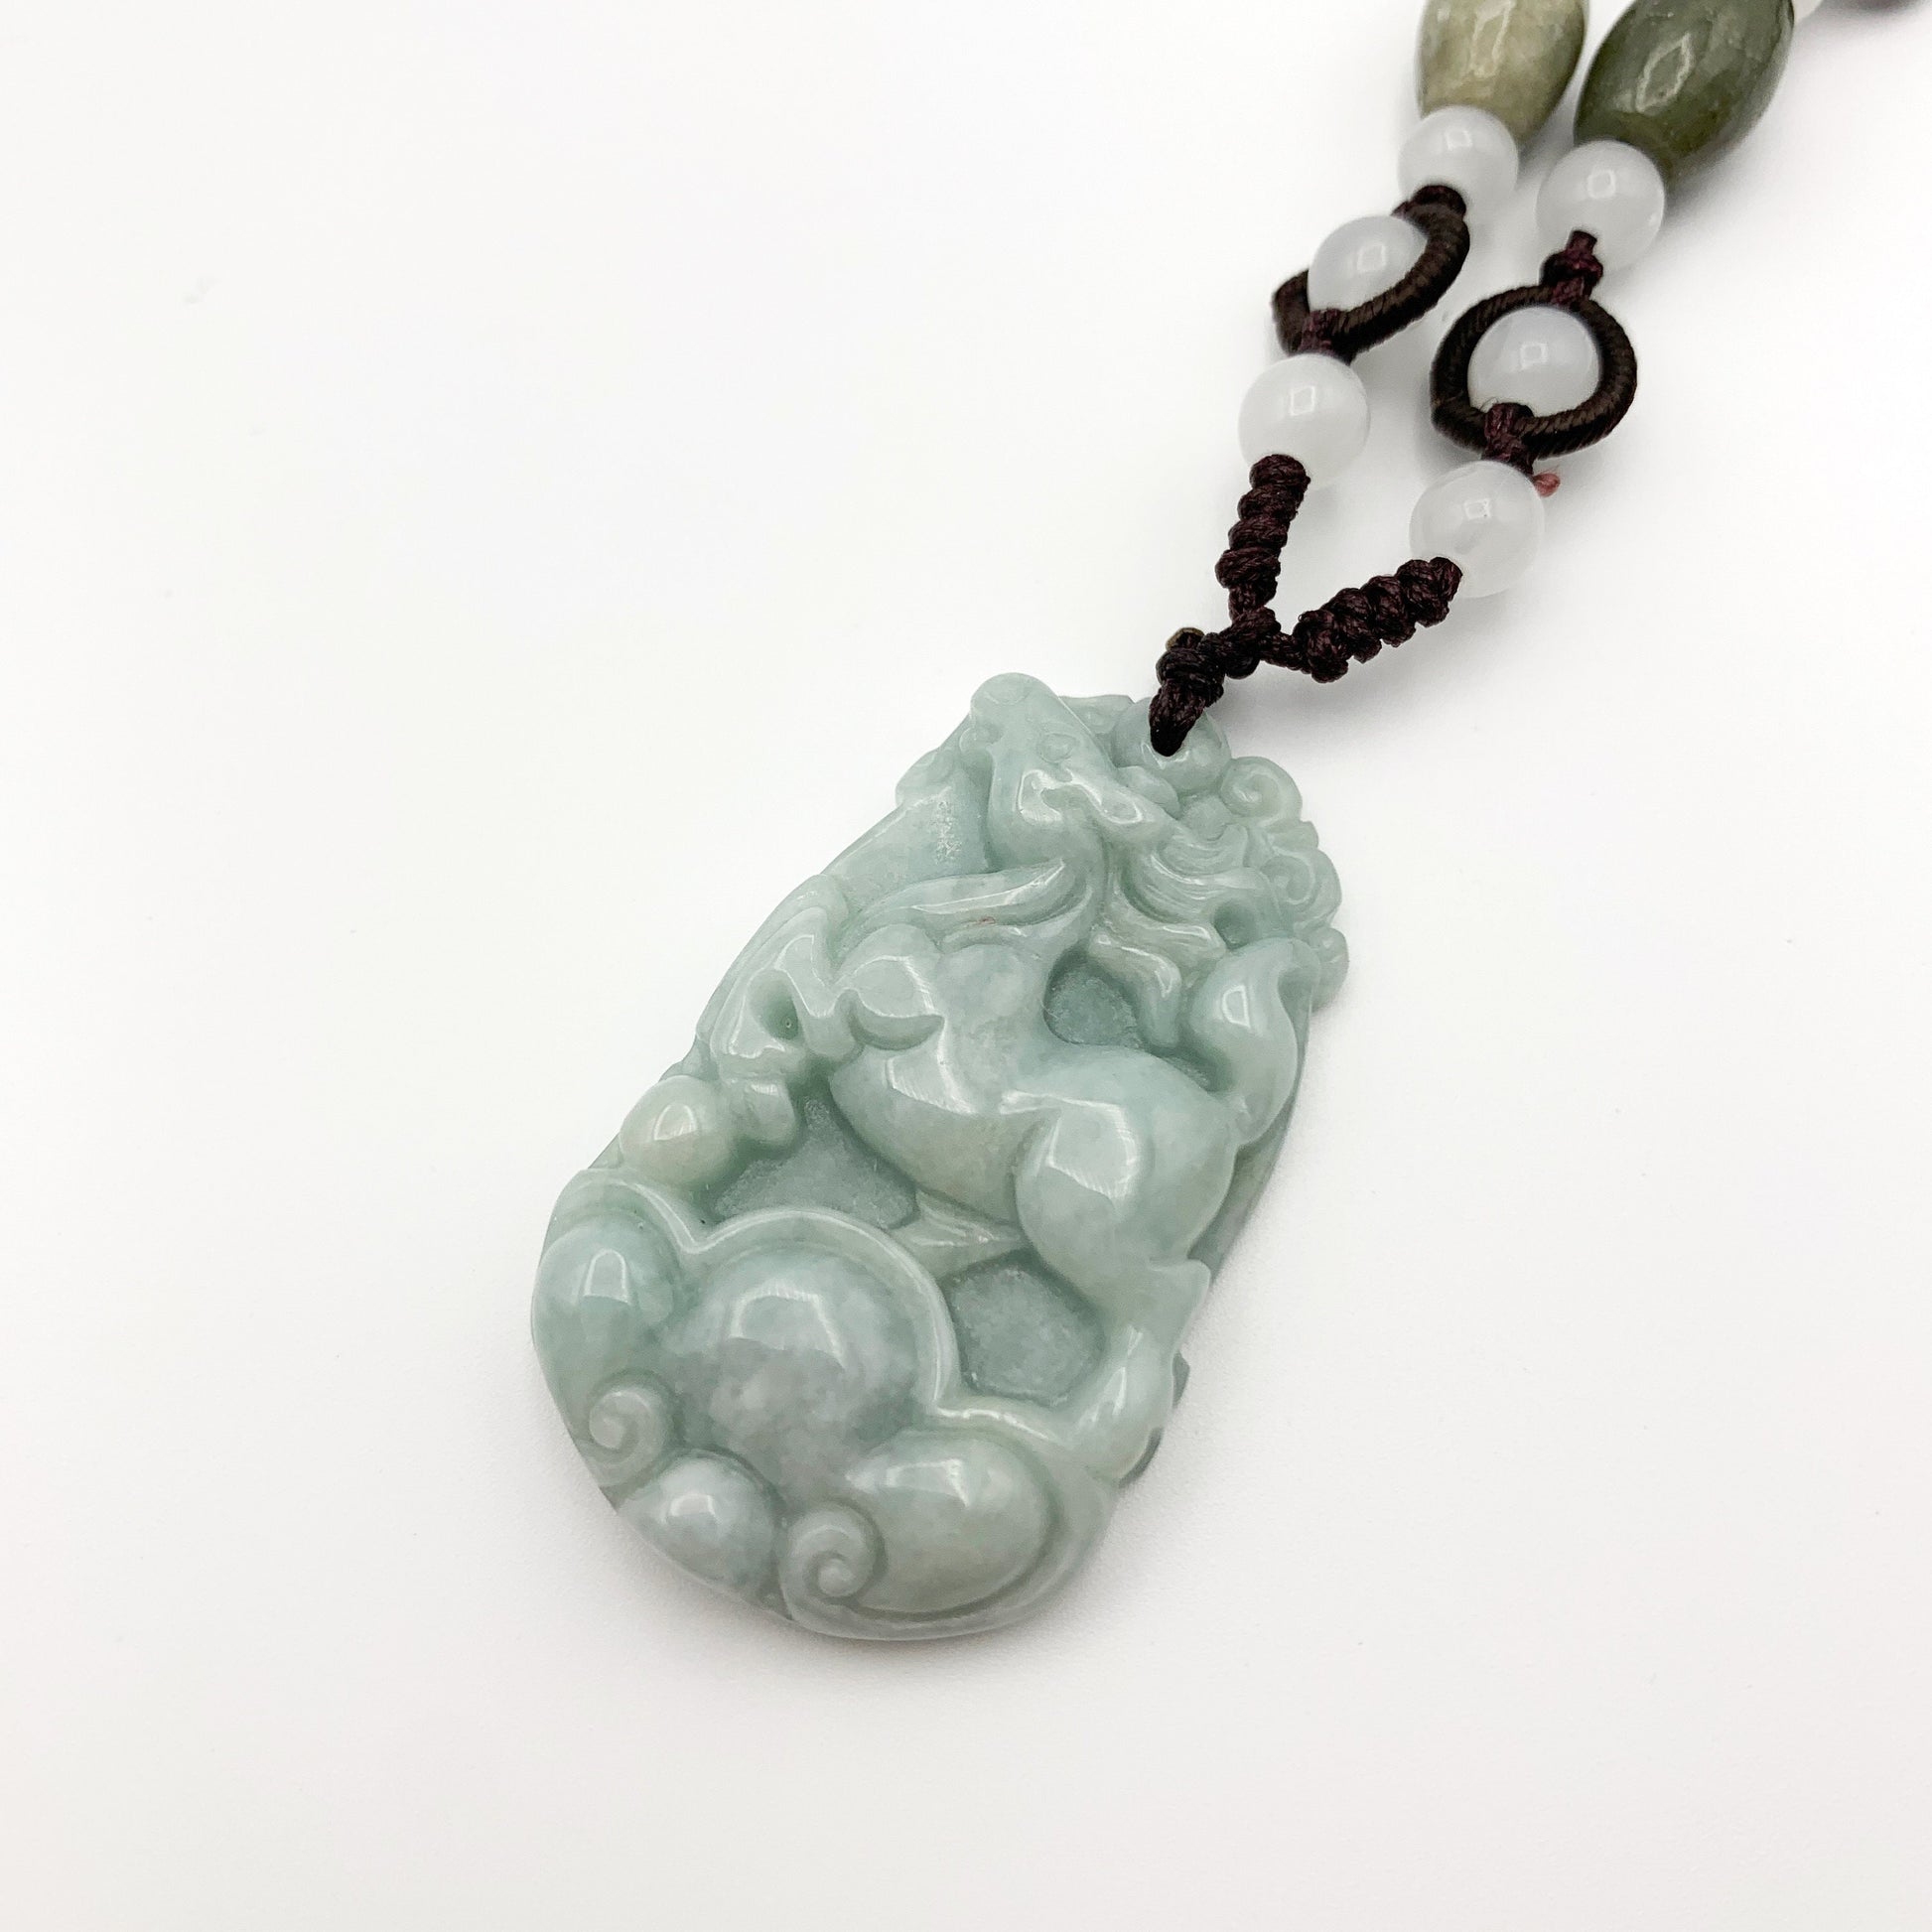 Horse Jade Chinese Zodiac Rustic Carved Pendant Necklace, YW-0110-1646517385 - AriaDesignCollection